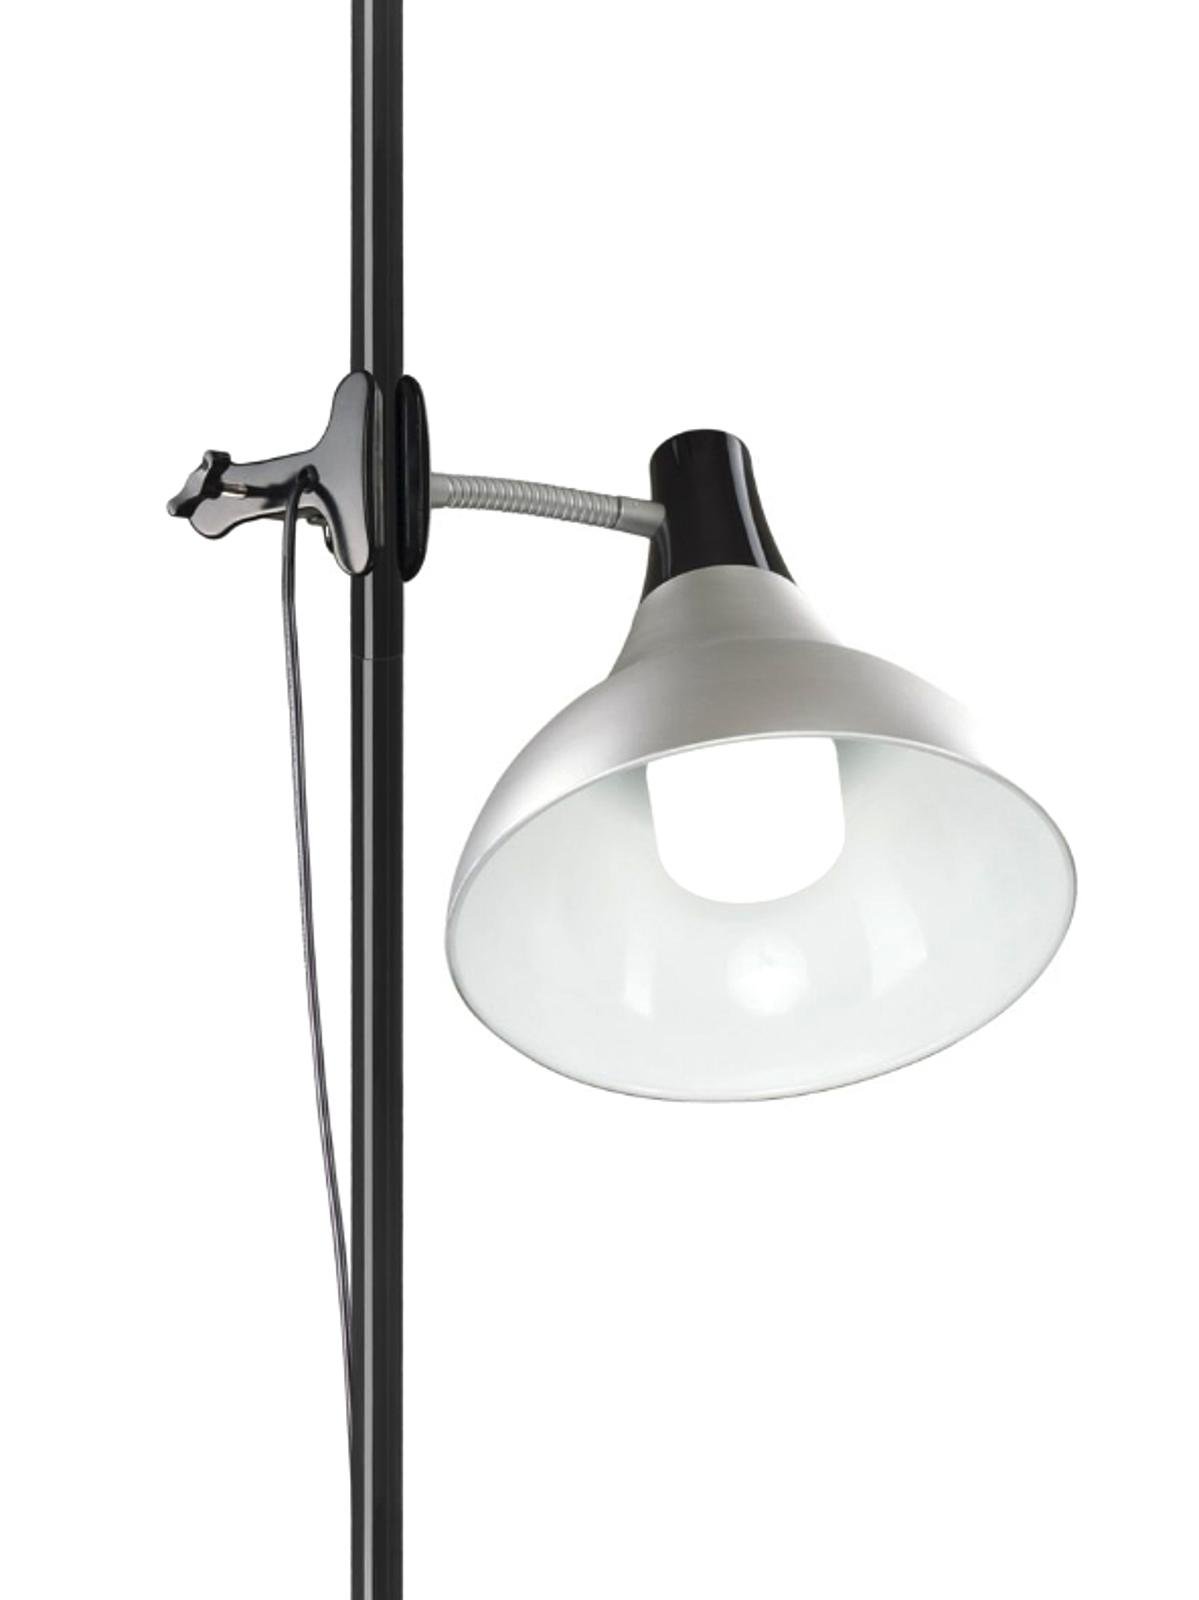 Daylight - Artist Studio Lamp With Stand